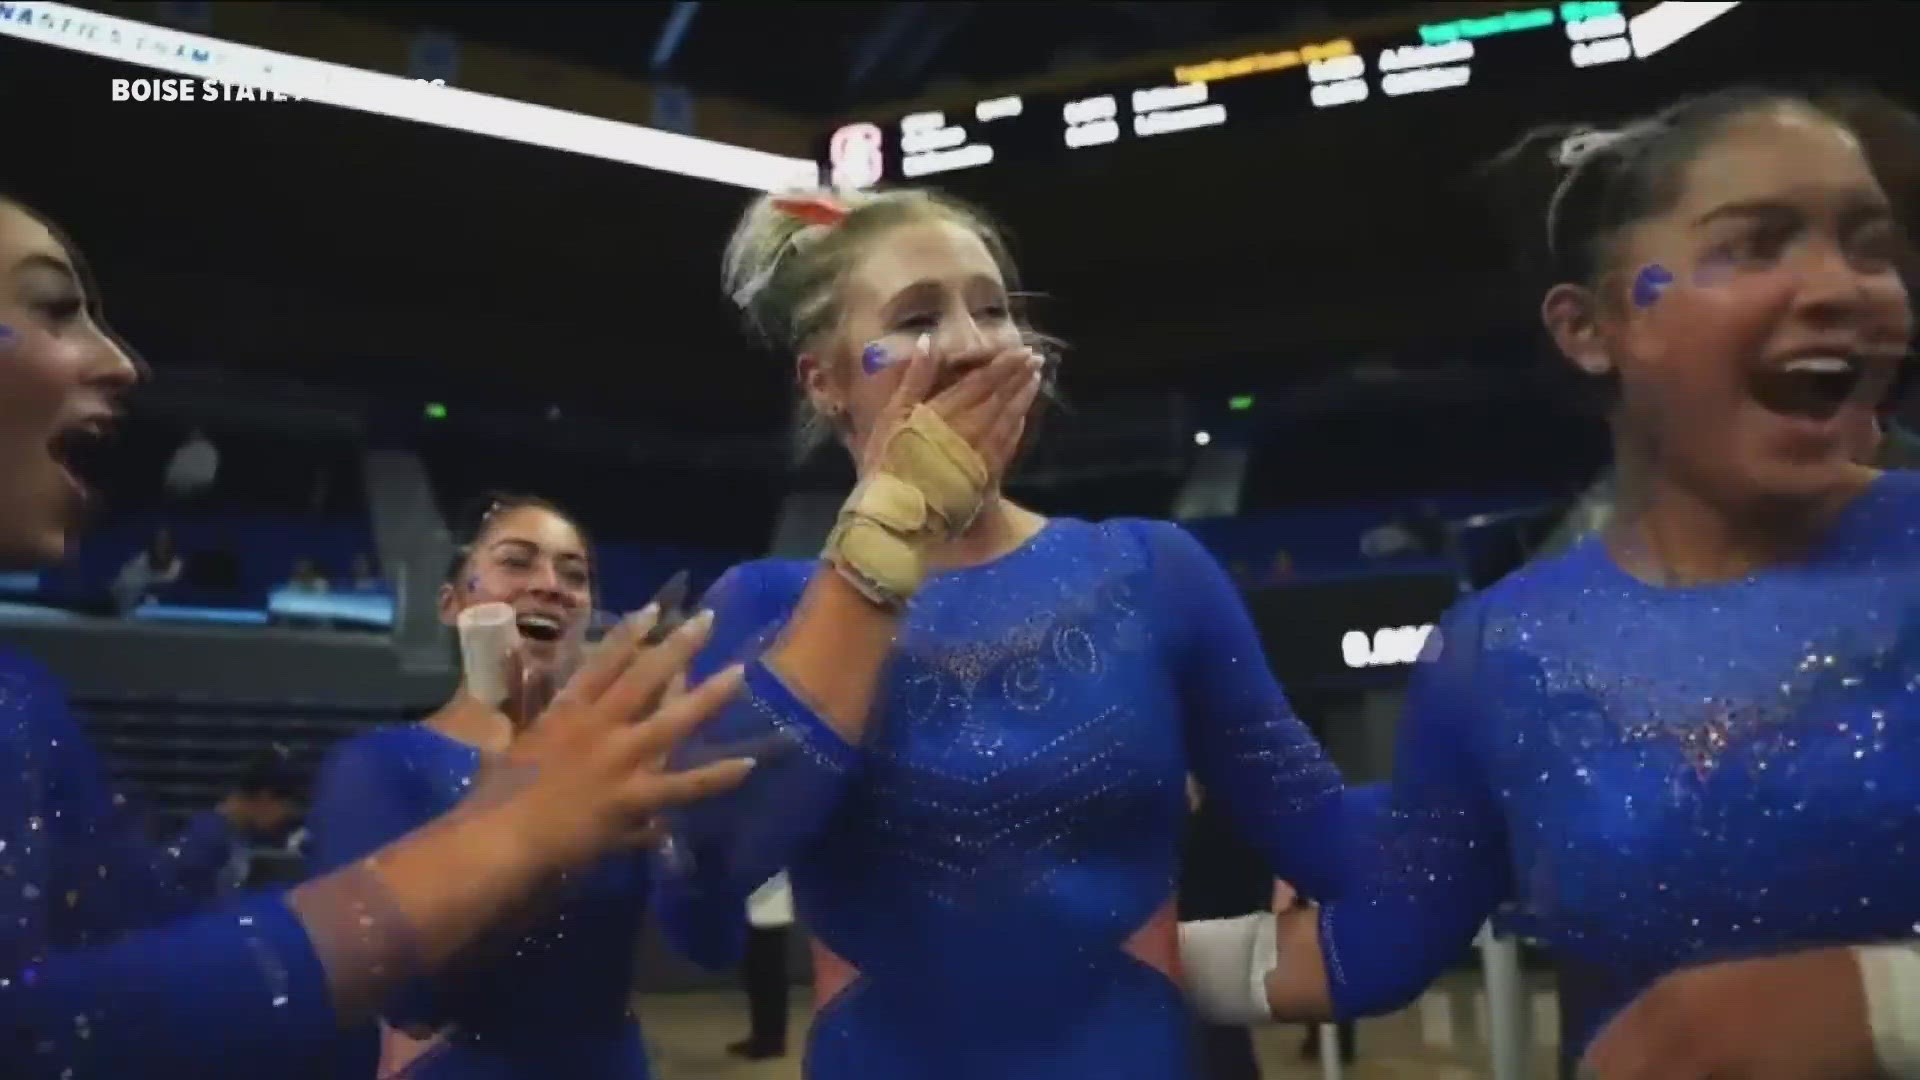 Boise State's Courtney Blackson and Emily Lopez will compete in Fort Worth starting April 13. A Bronco has not competed in the national championships since 2018.